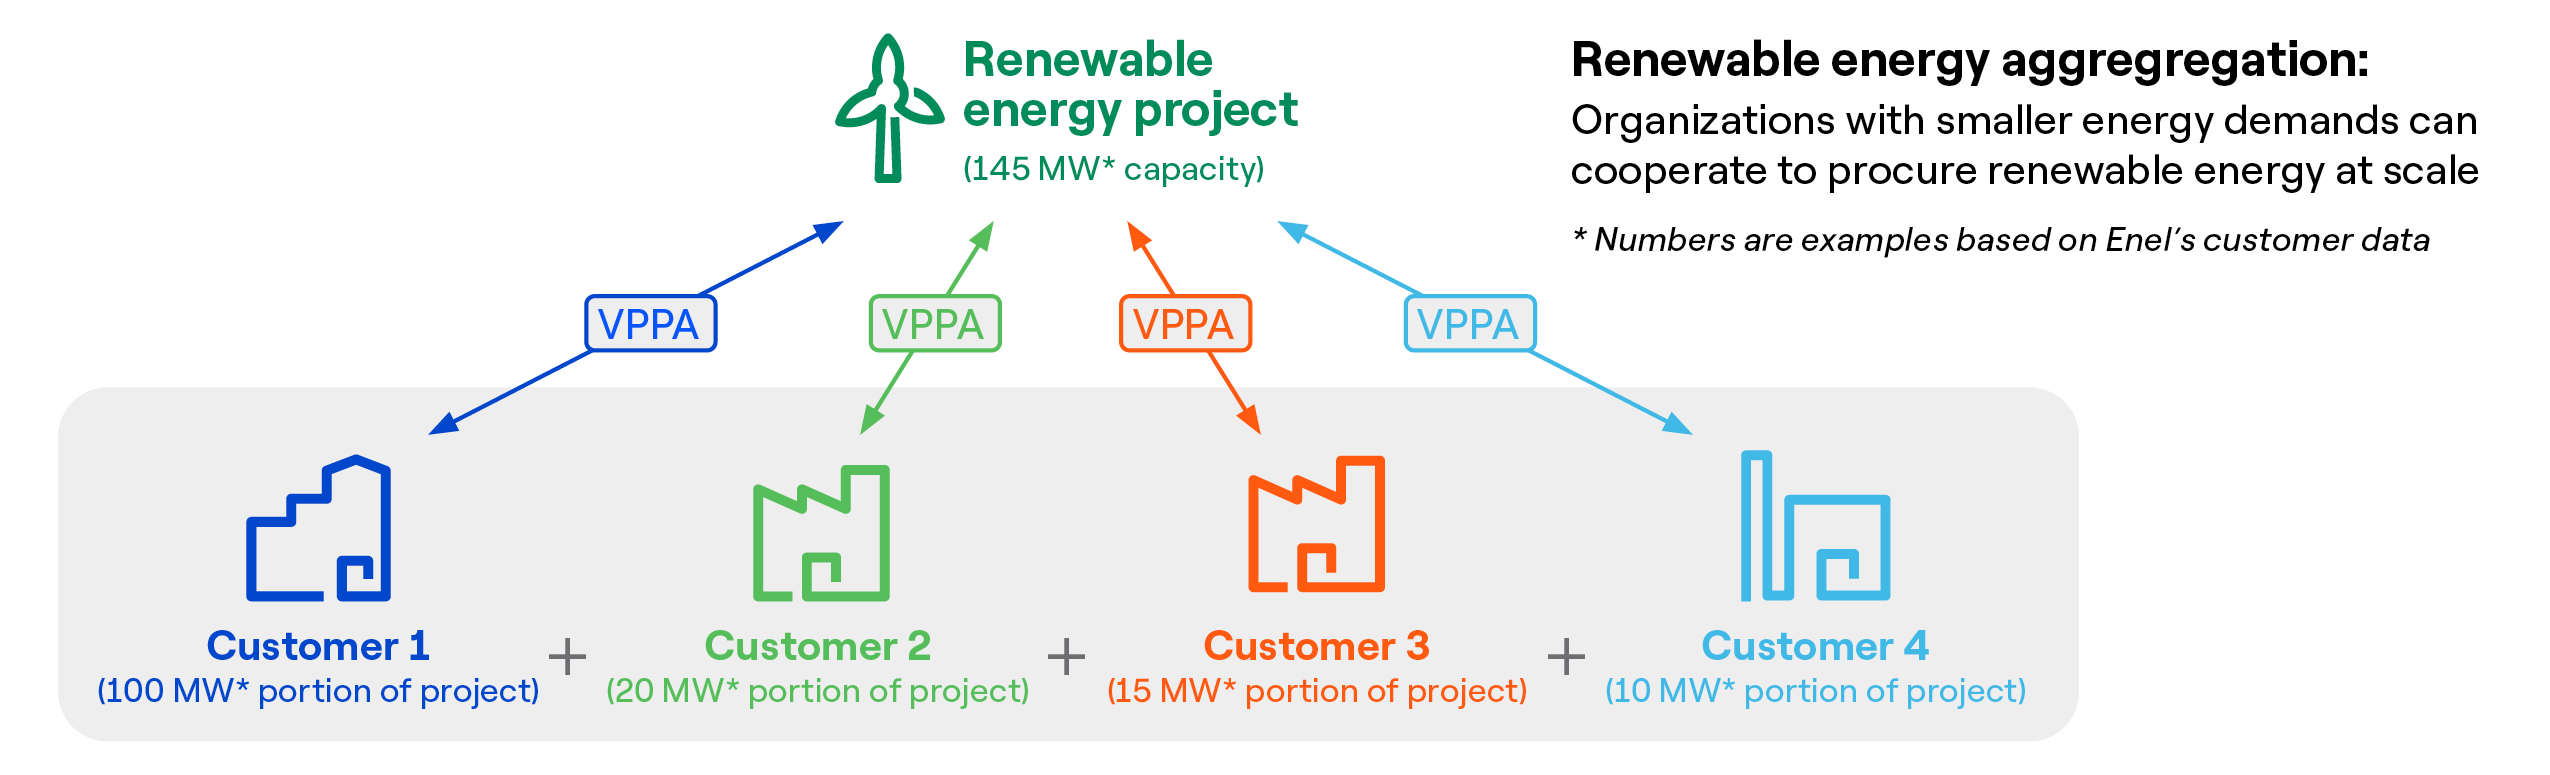 Infographic showing renewable energy aggregation